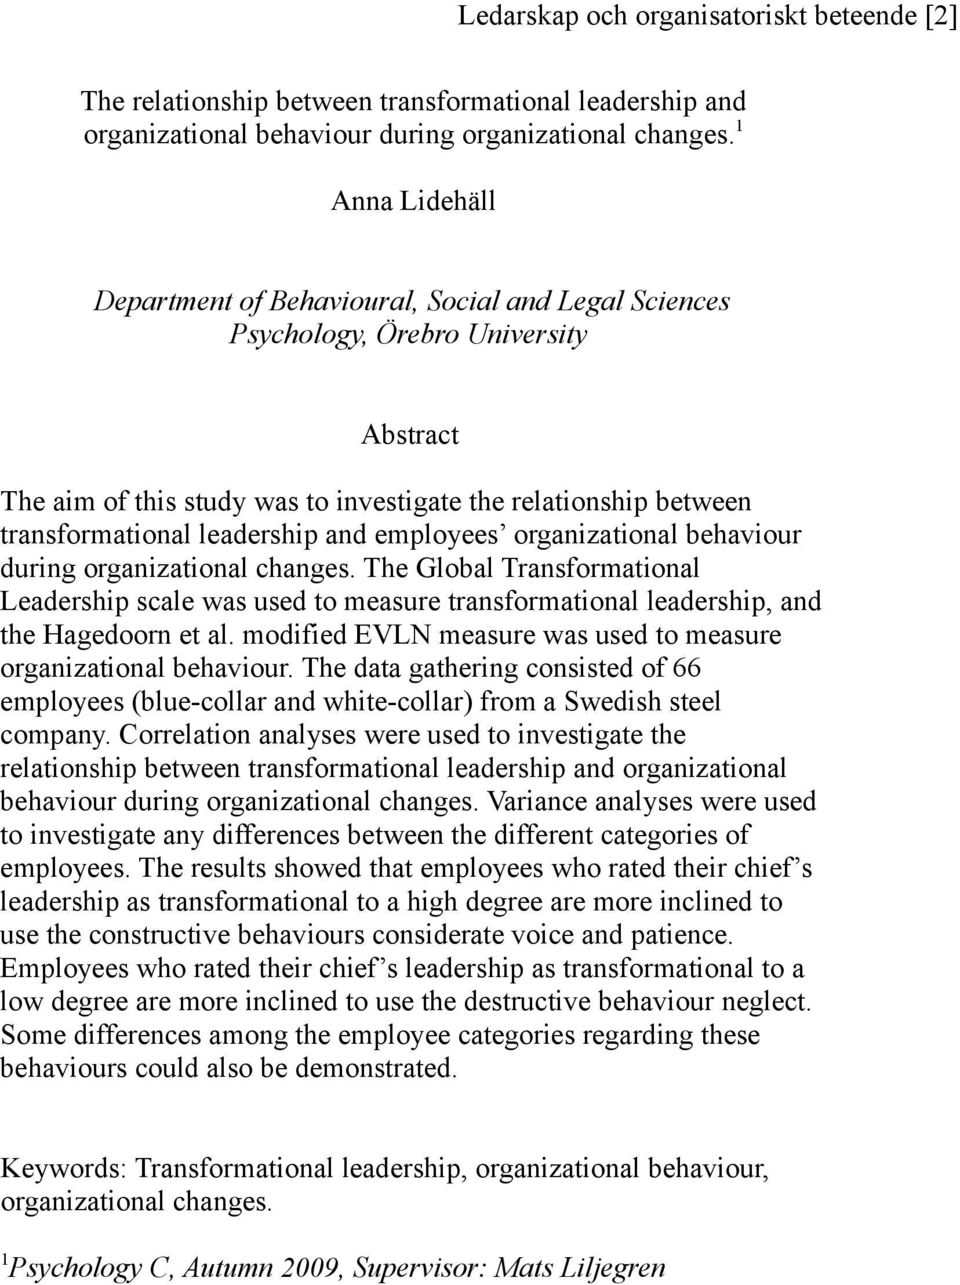 leadership and employees organizational behaviour during organizational changes. The Global Transformational Leadership scale was used to measure transformational leadership, and the Hagedoorn et al.